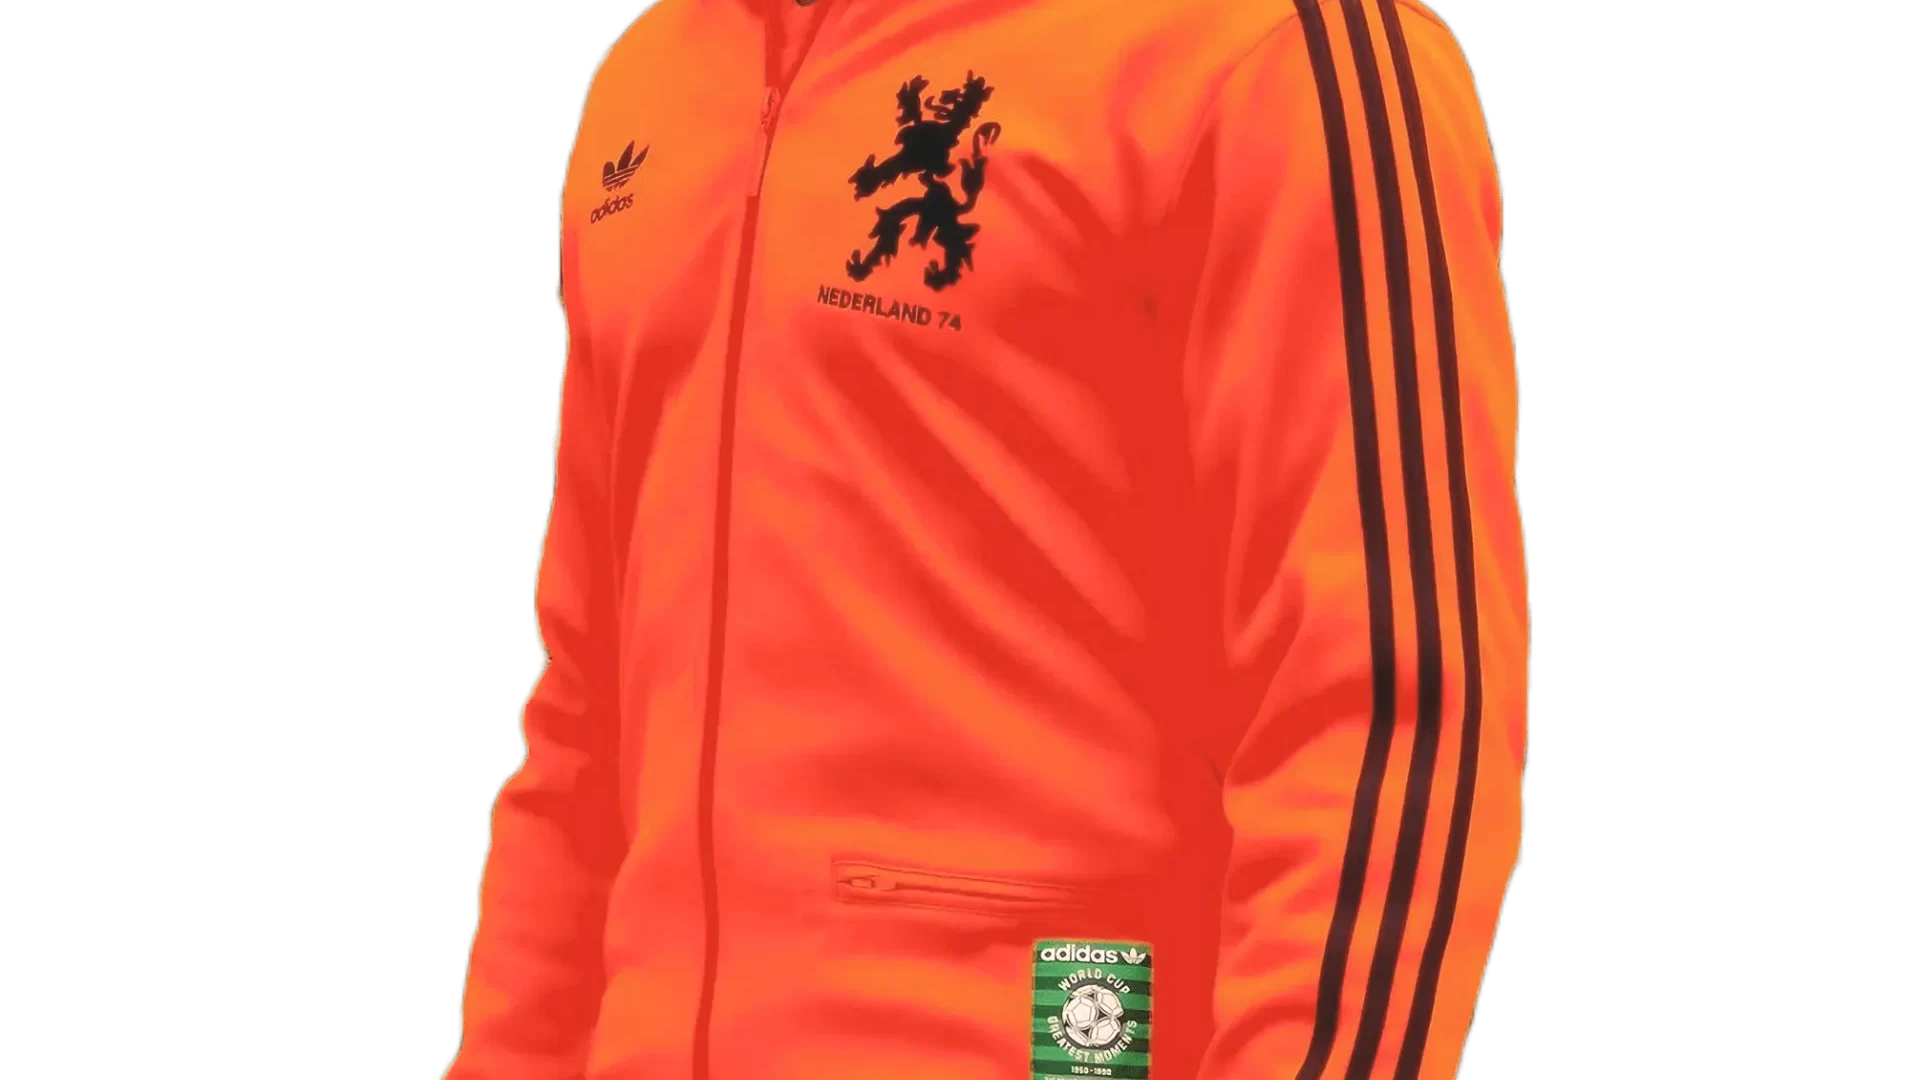 Men's 2005 Netherlands '74 Total Football TT by Adidas: Conscientious (EnLawded.com file #lmchk55778ip2y123337kg9st)